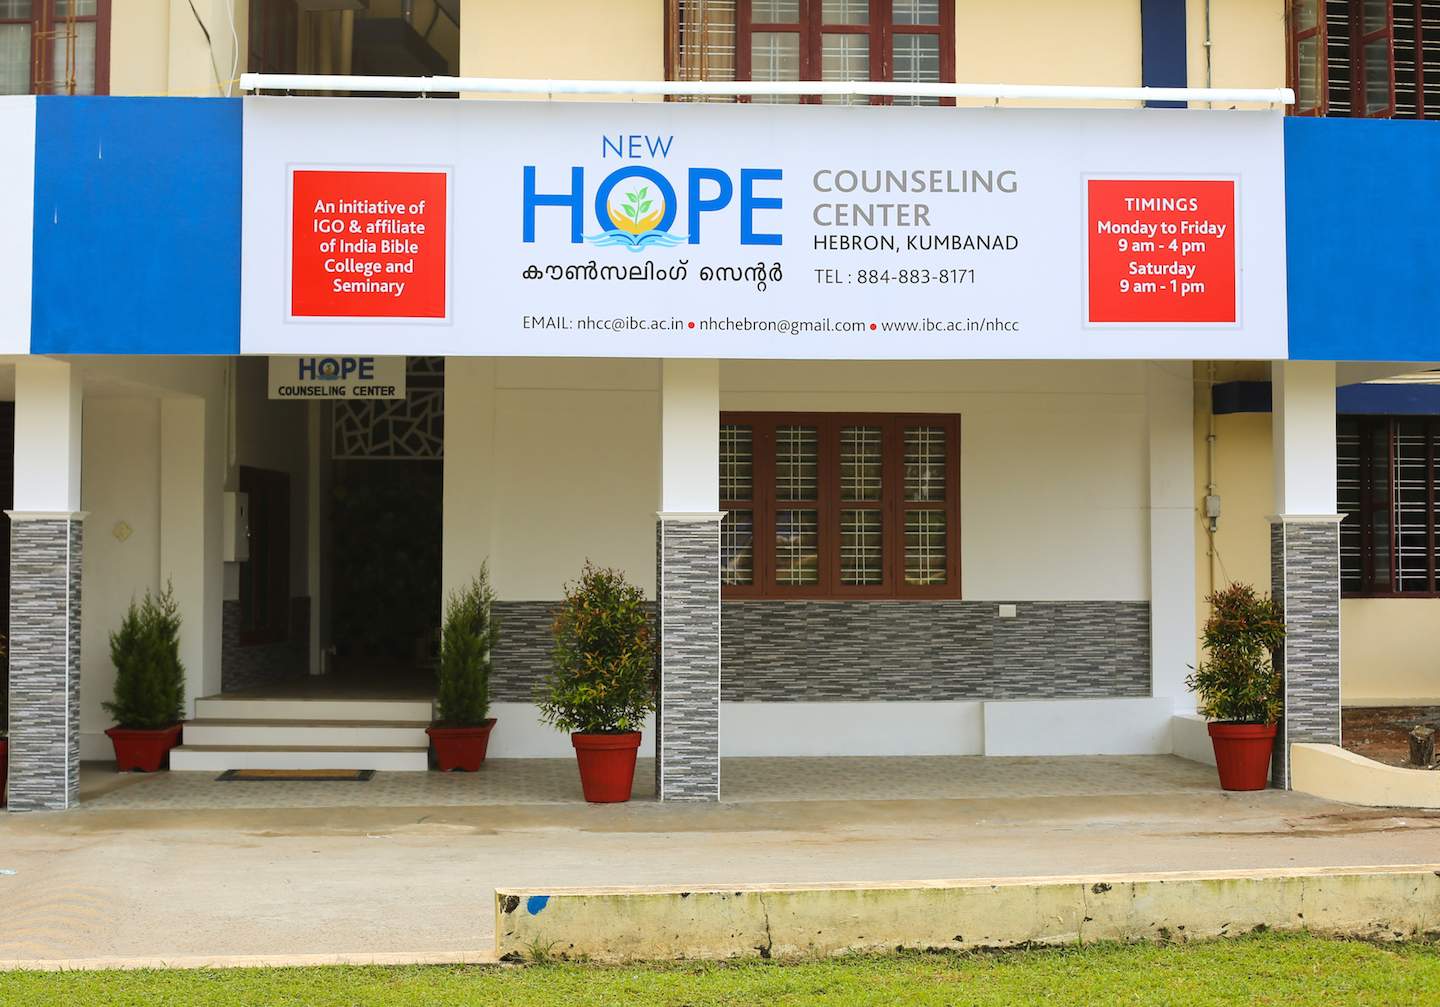 New Hope Counseling Center is an initiative of India Gospel Outreach and India Bible College and Seminary.